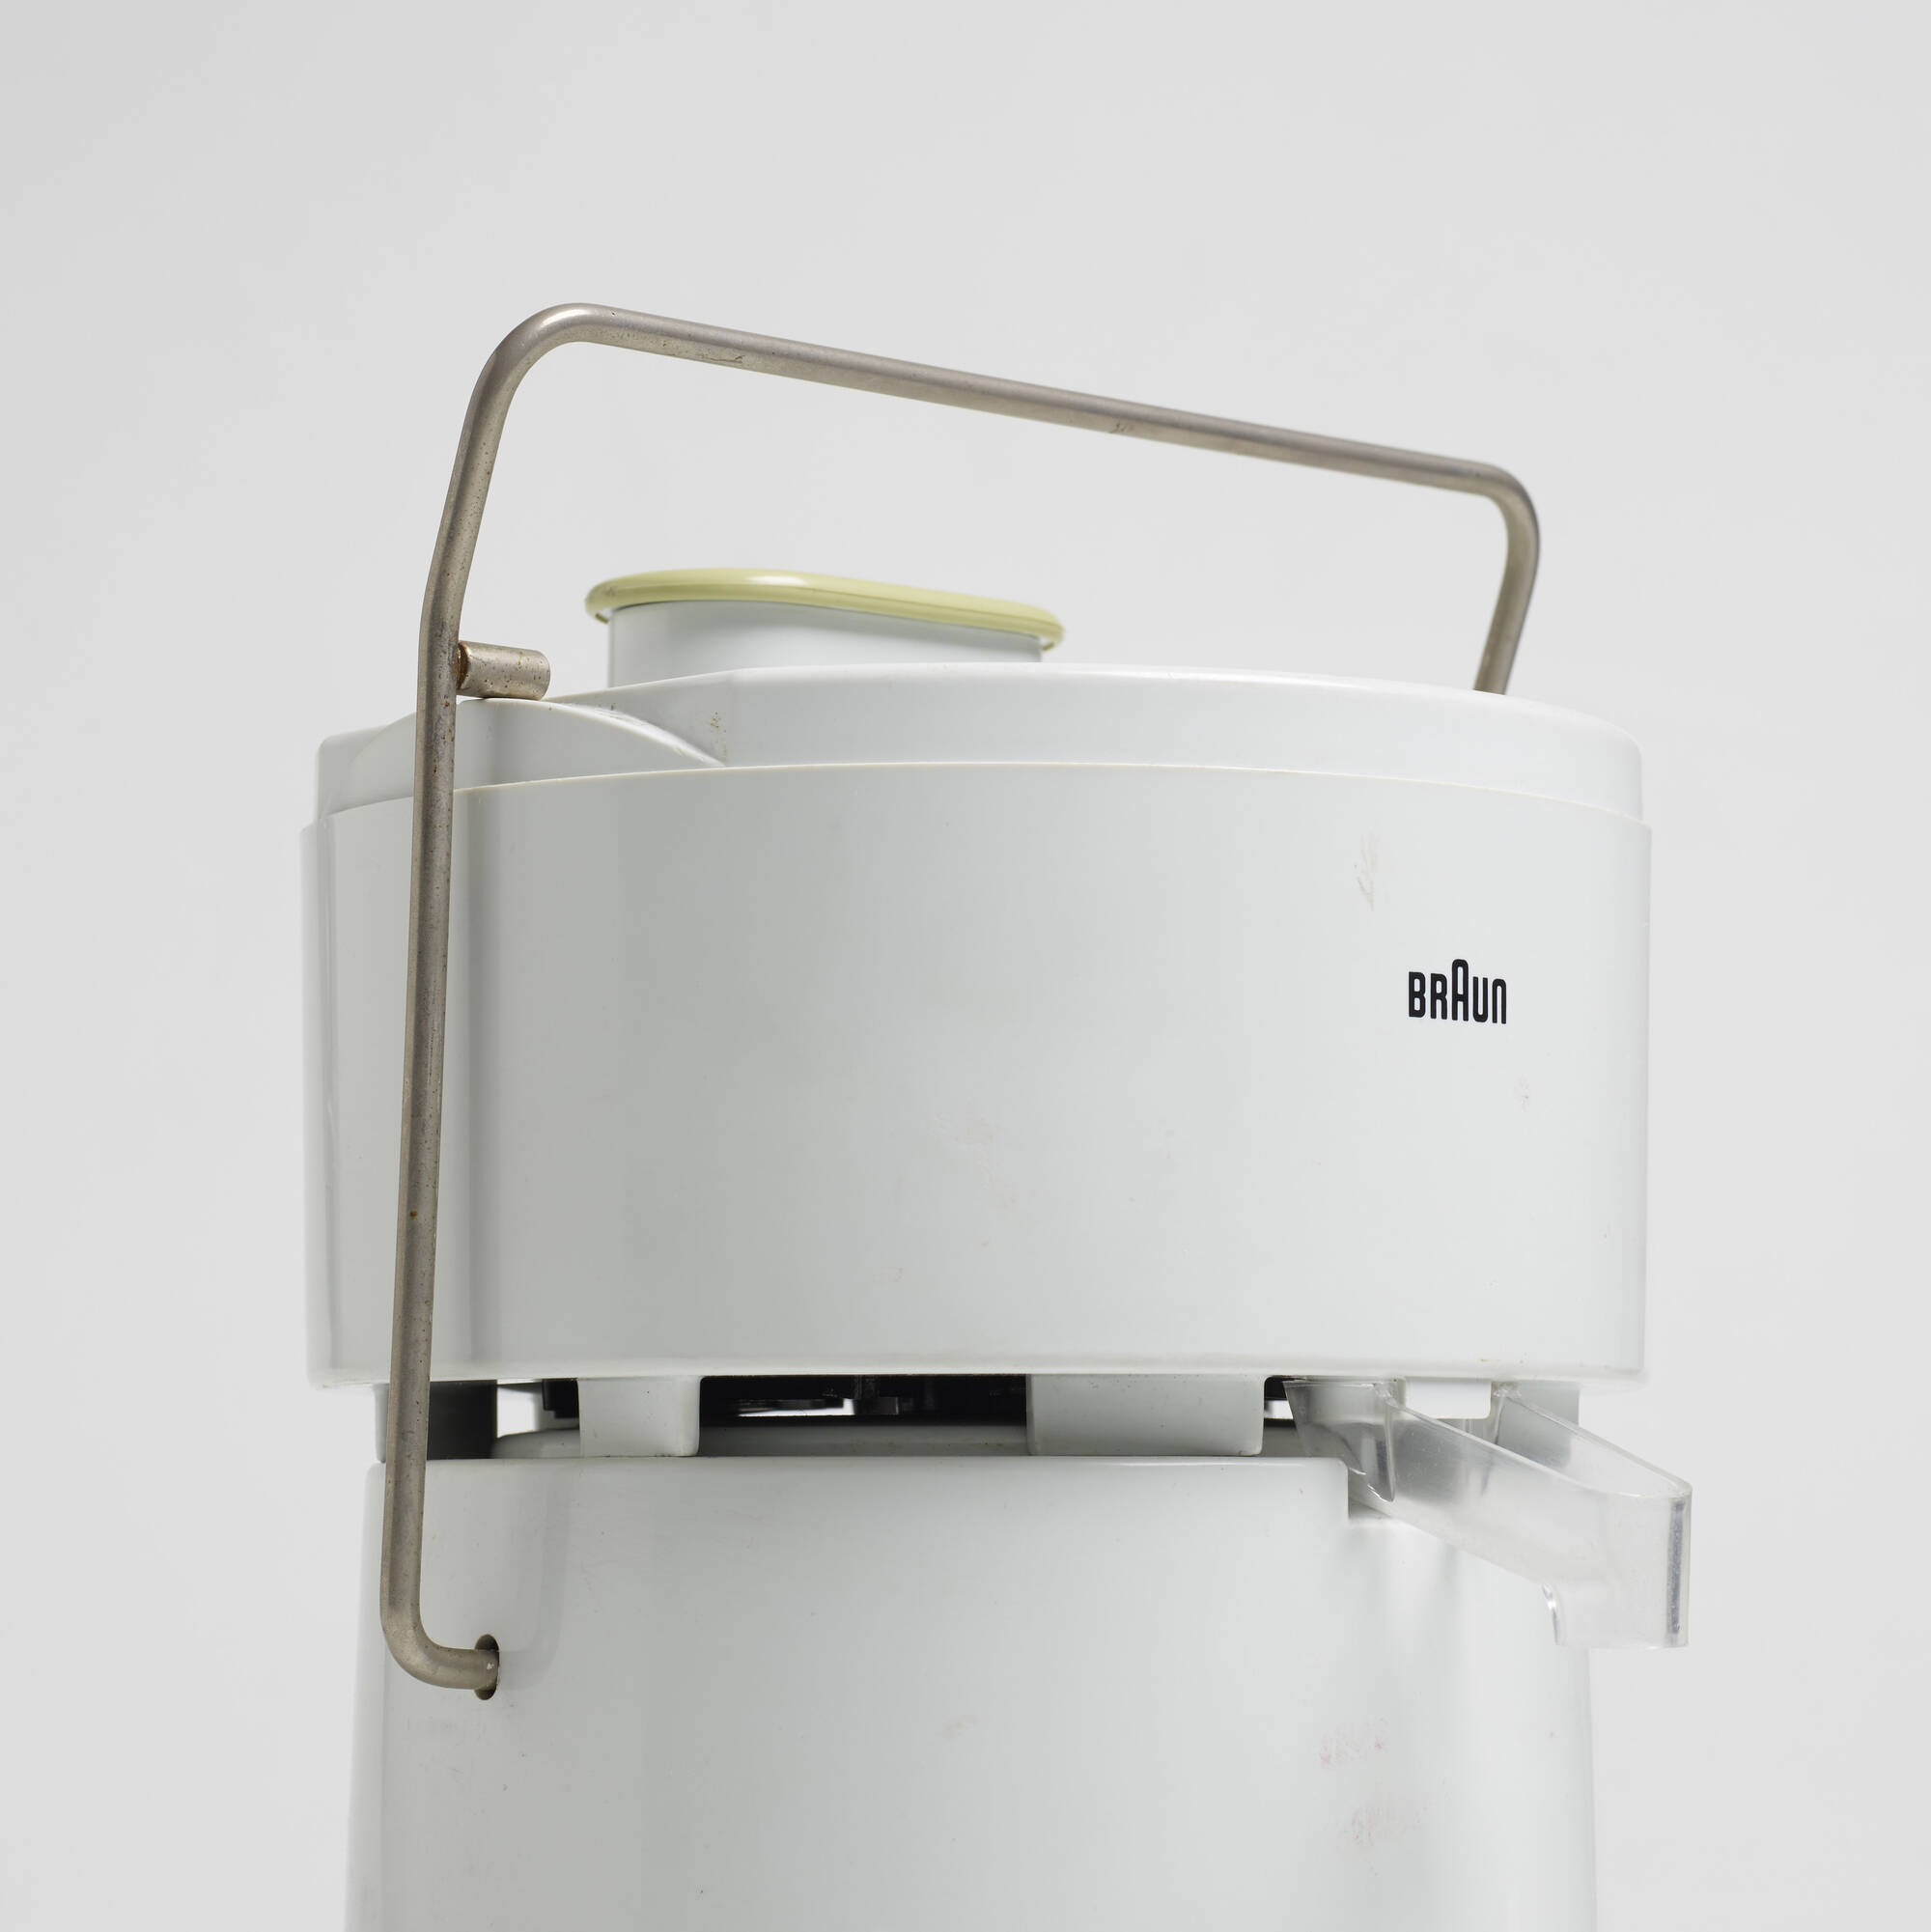 Banzai at straffe prinsesse 102: GERD ALFRED MÜLLER, MP 32 Multipress juicer < Dieter Rams: The JF Chen  Collection, 12 July 2018 < Auctions | Wright: Auctions of Art and Design